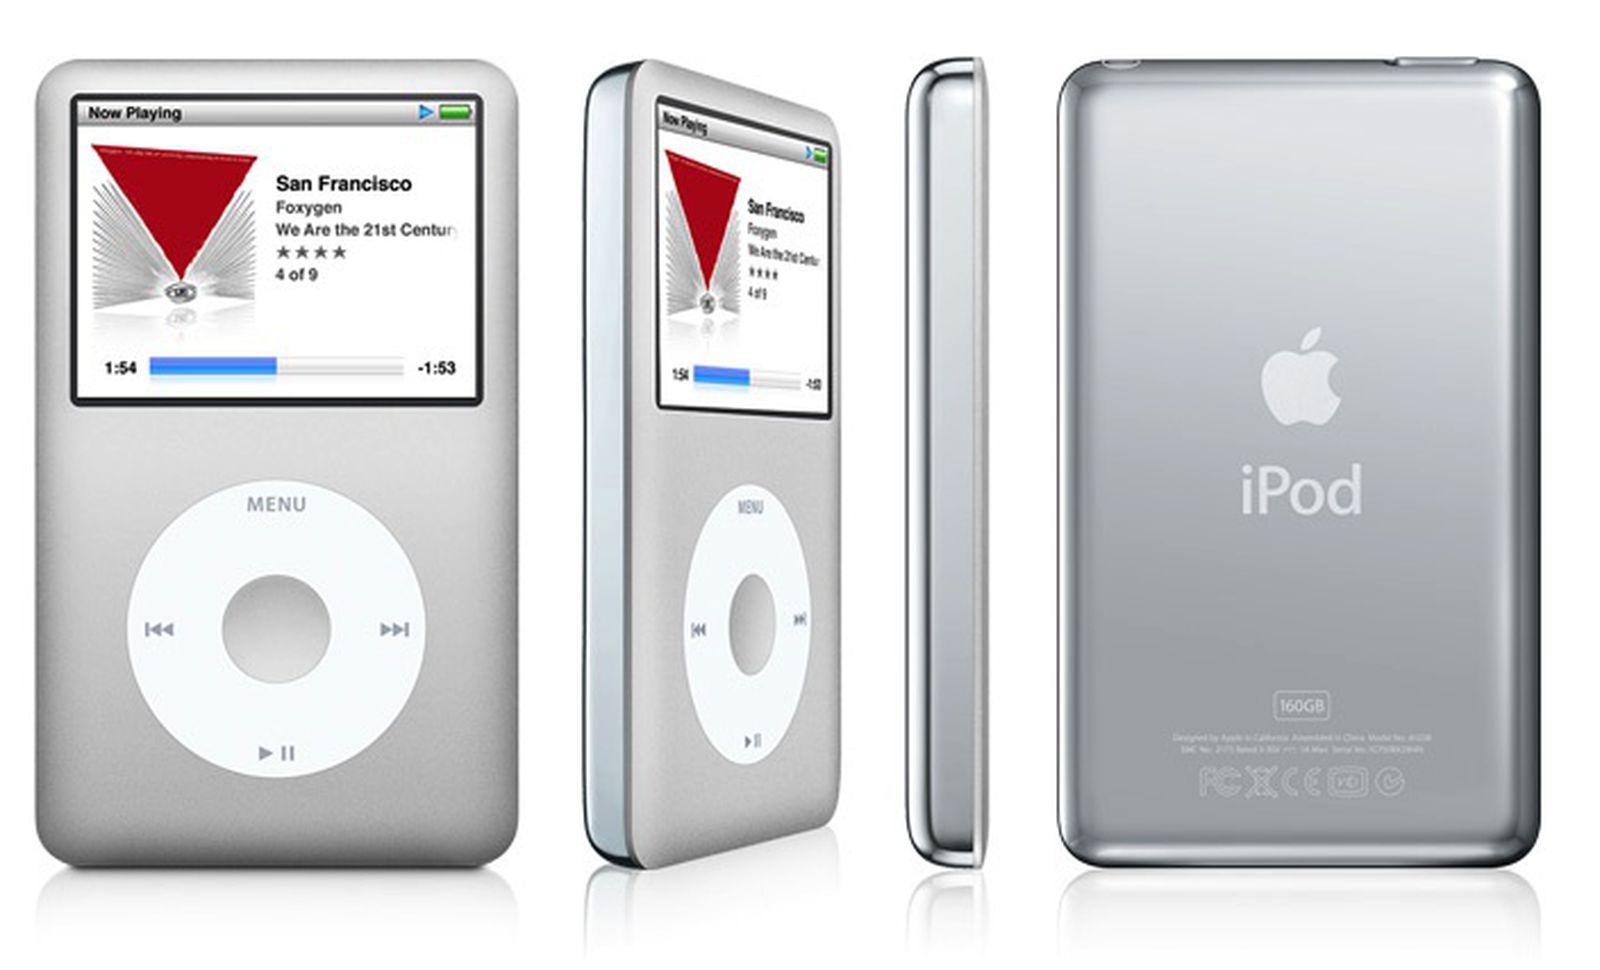 Apple is retiring the iPod nano, a tiny gadget that made a huge